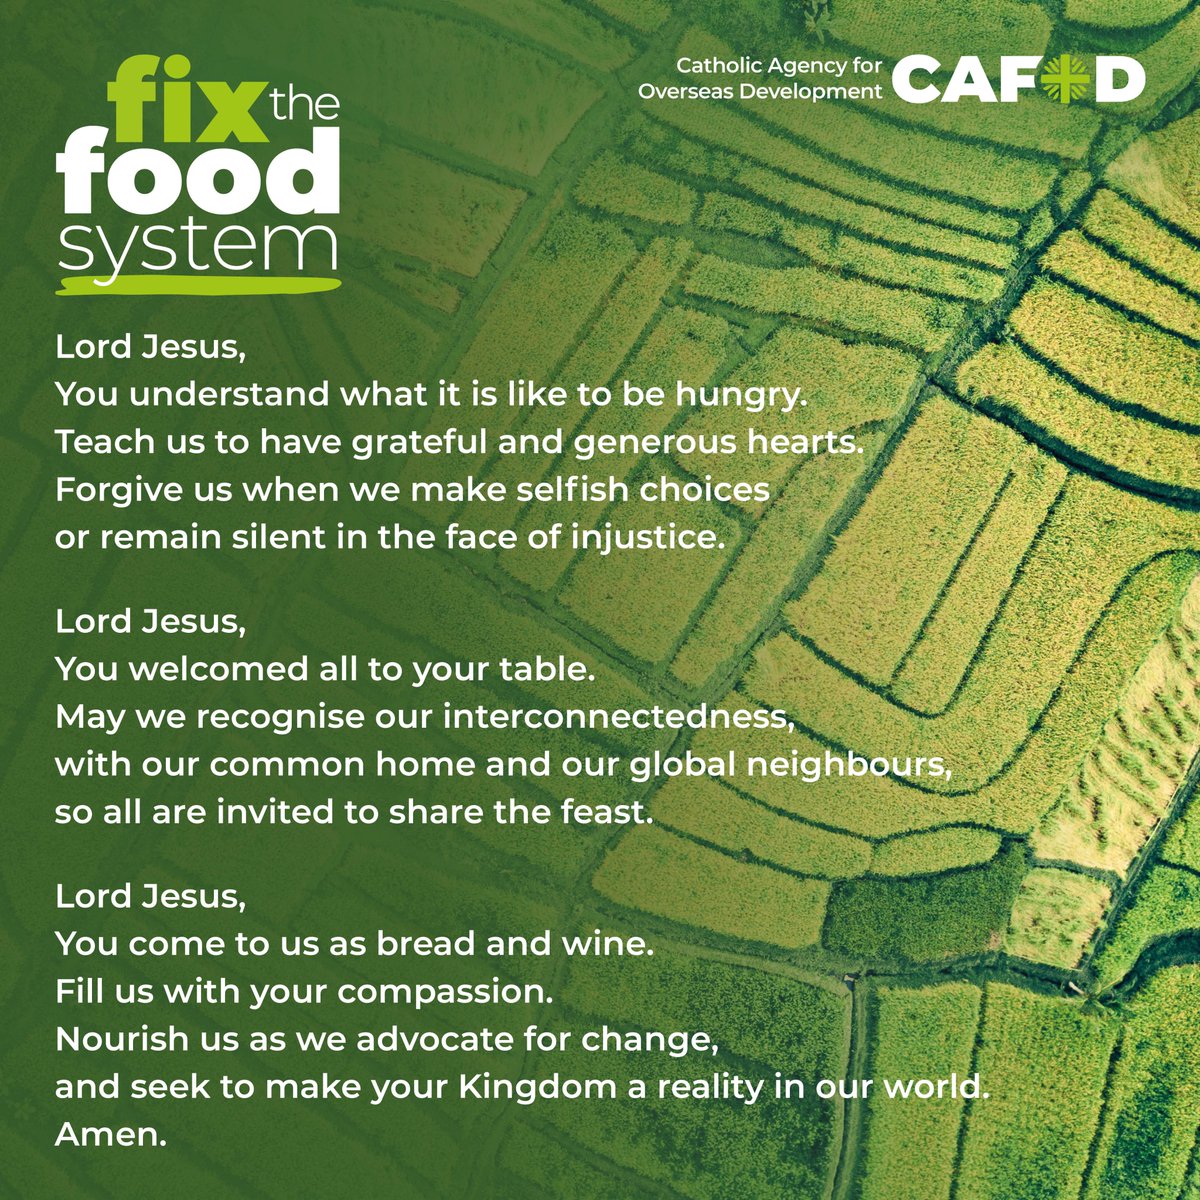 Join us in prayer for a more just food system: May we recognise our interconnectedness, with our common home and our global neighbours, so all are invited to share the feast.🙏 Find out more about our #FixTheFoodSystem campaign here: cafod.org.uk/campaign/fix-t…